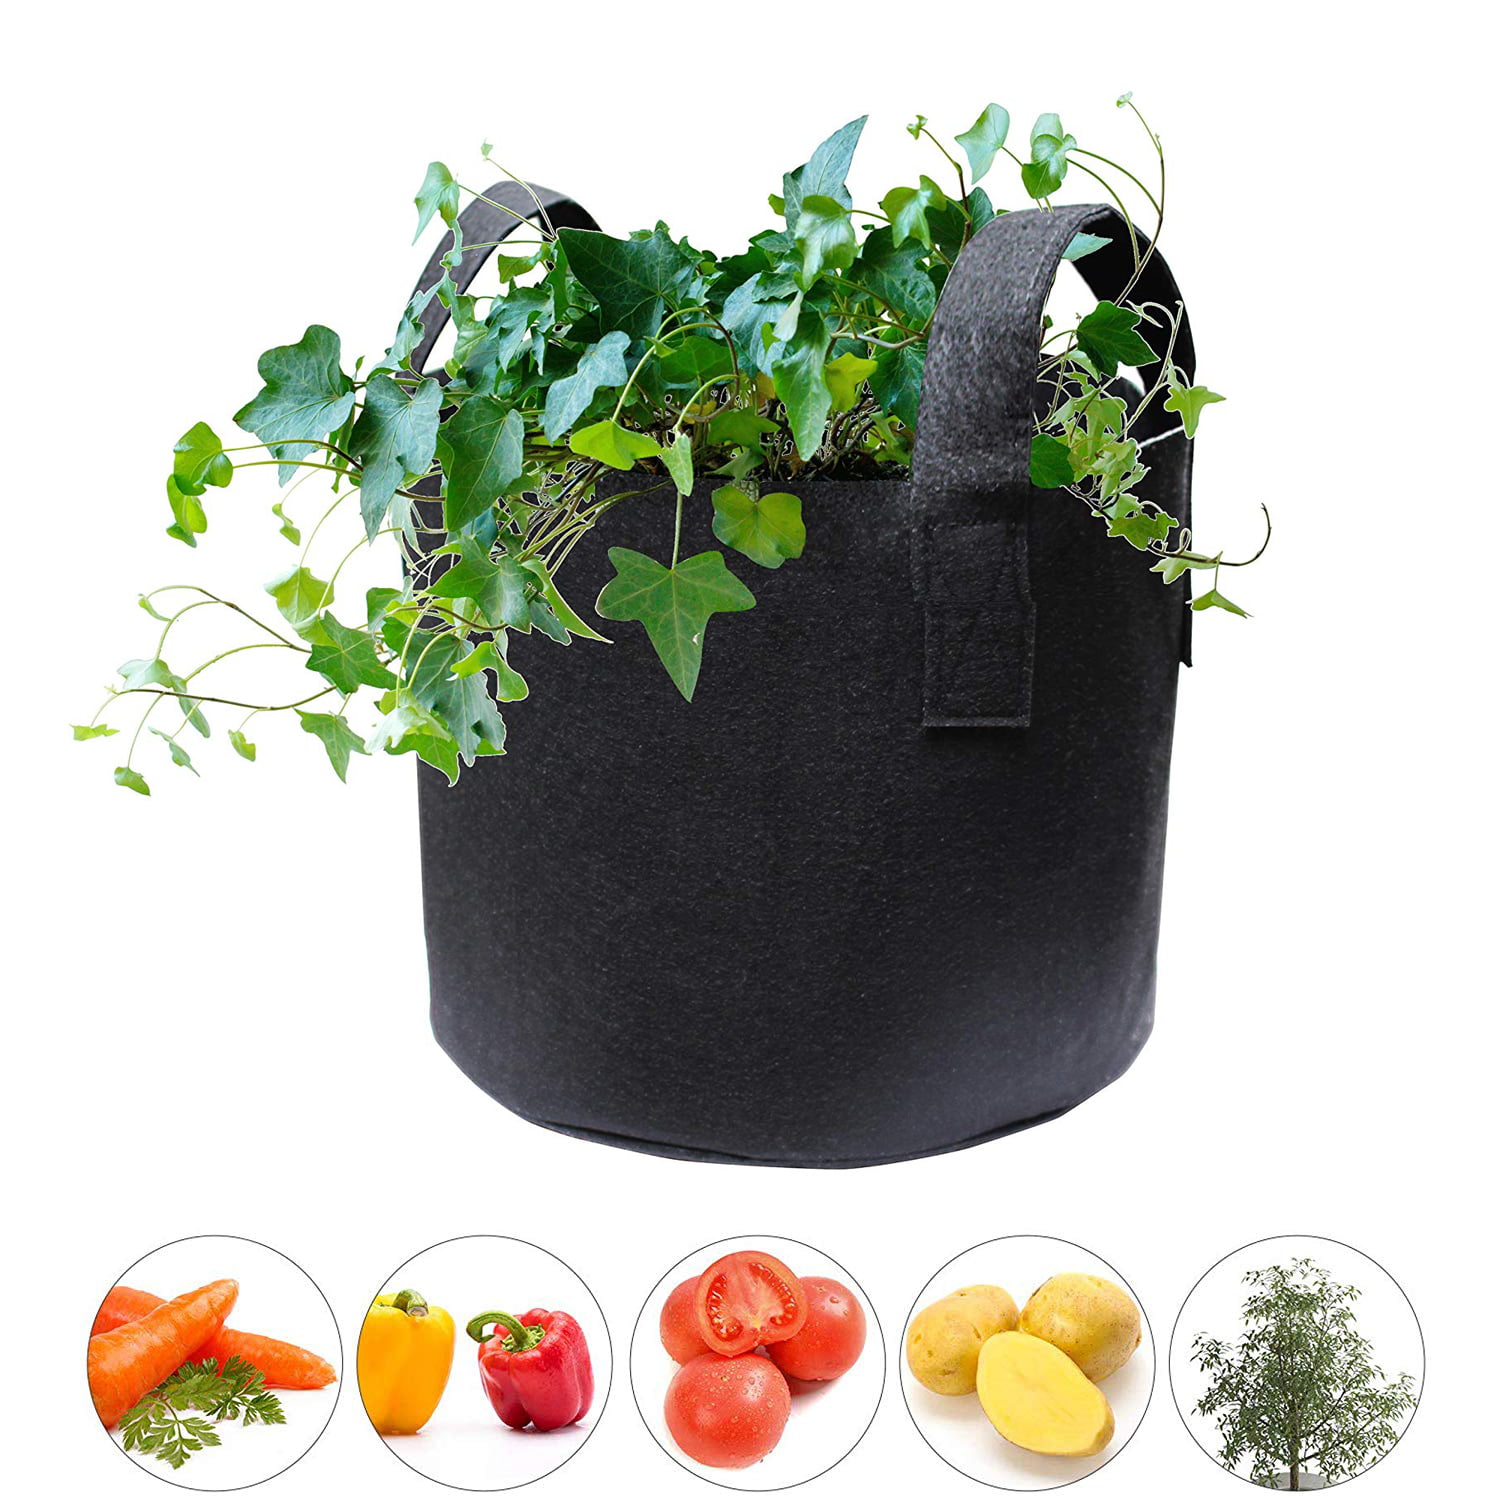 10 Gallon 5 Bags Square Fabric Grow Bag Garden Planting Bags With Green Hand 